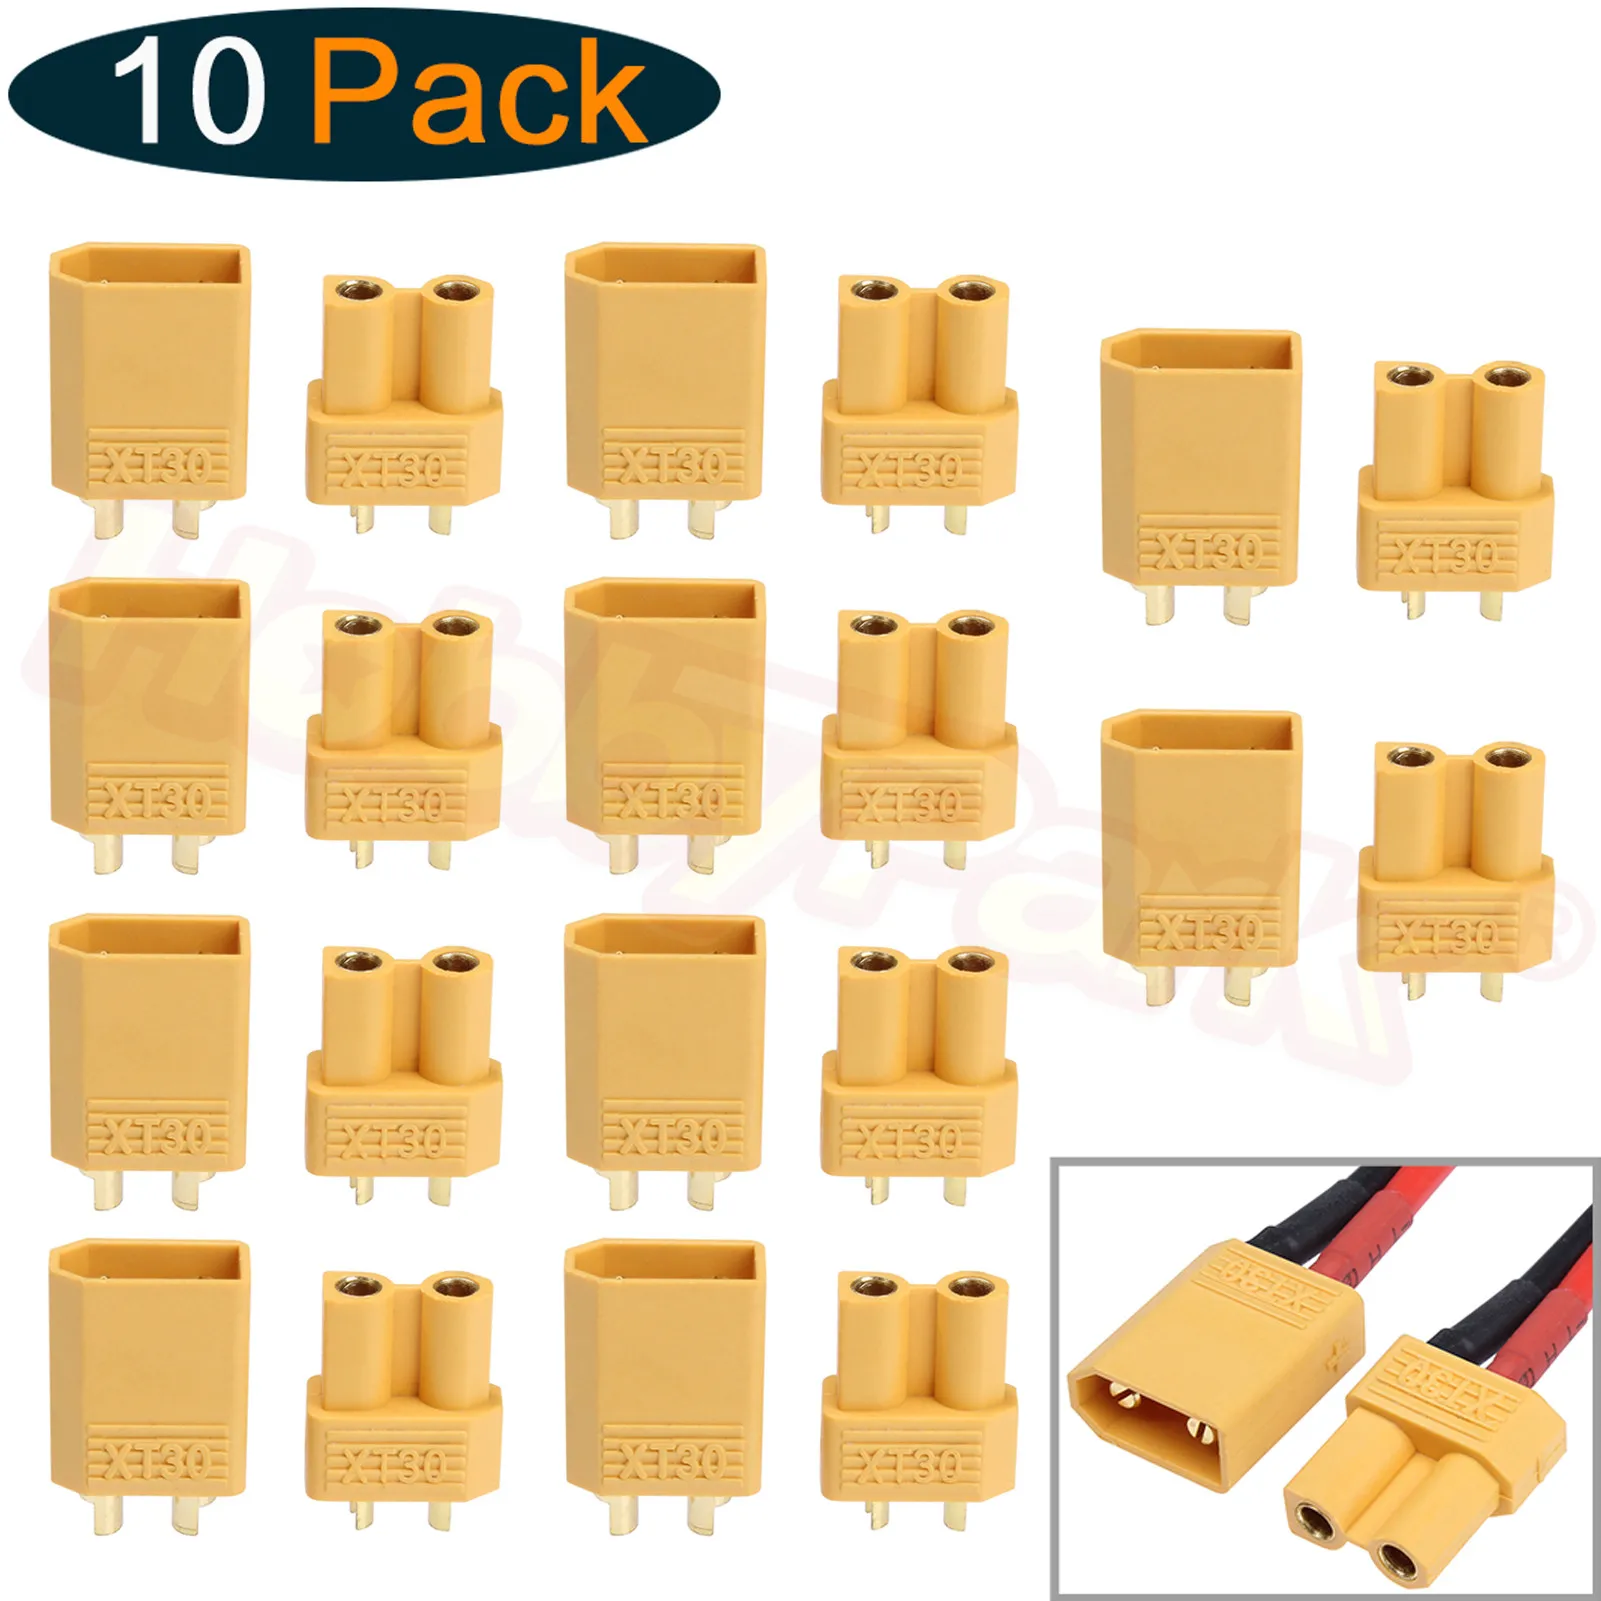 Hobbypark 10 Pairs XT30 Bullet Connectors Male Female Power Plugs with Heat Shrink Tubing for RC Lipo Battery Pack